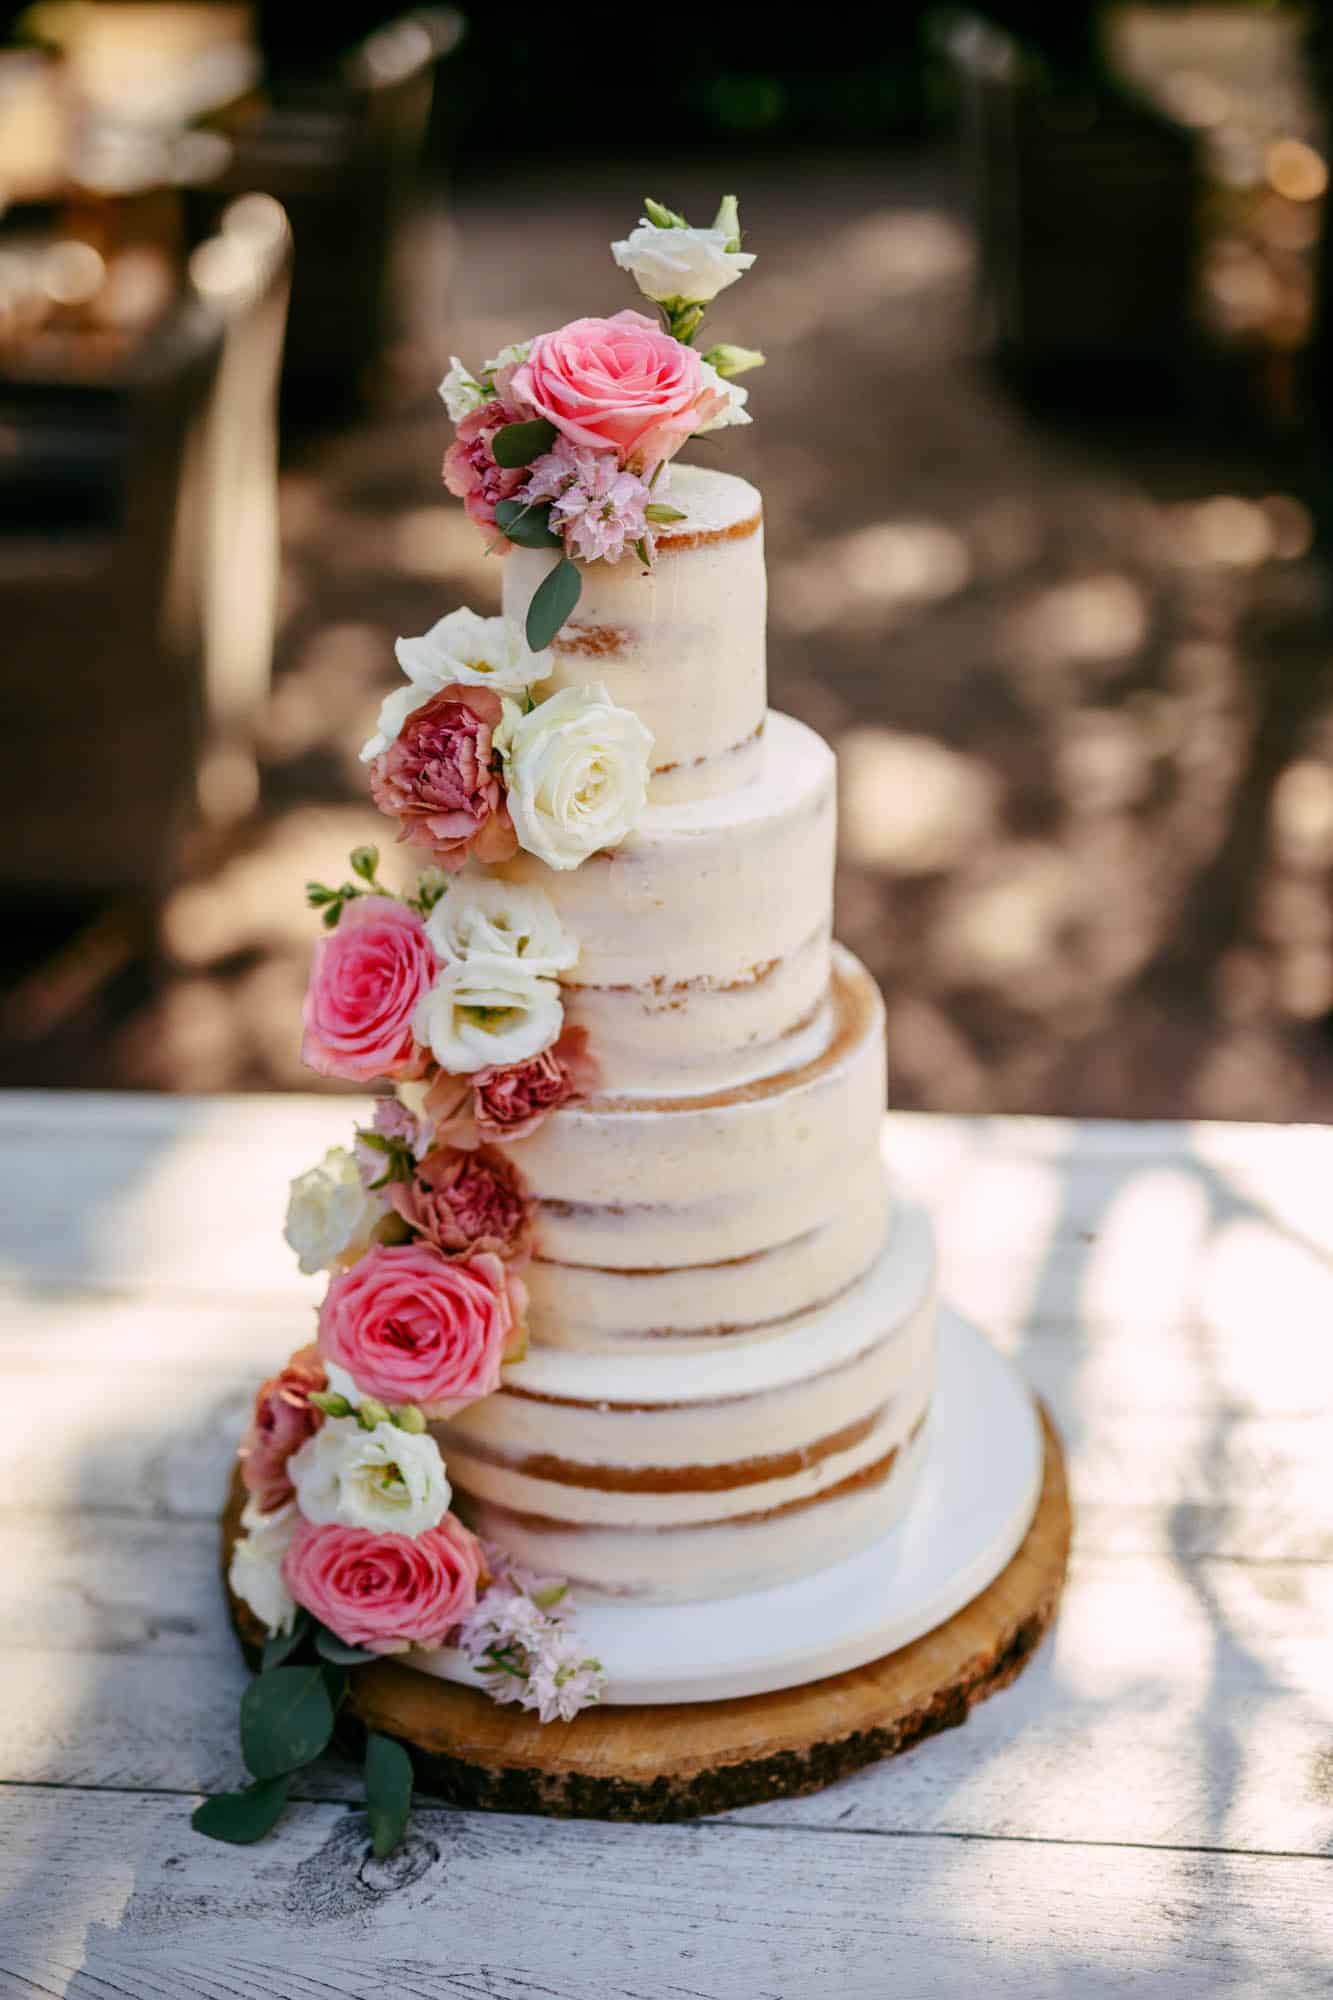 A wedding cake with pink flowers on top.